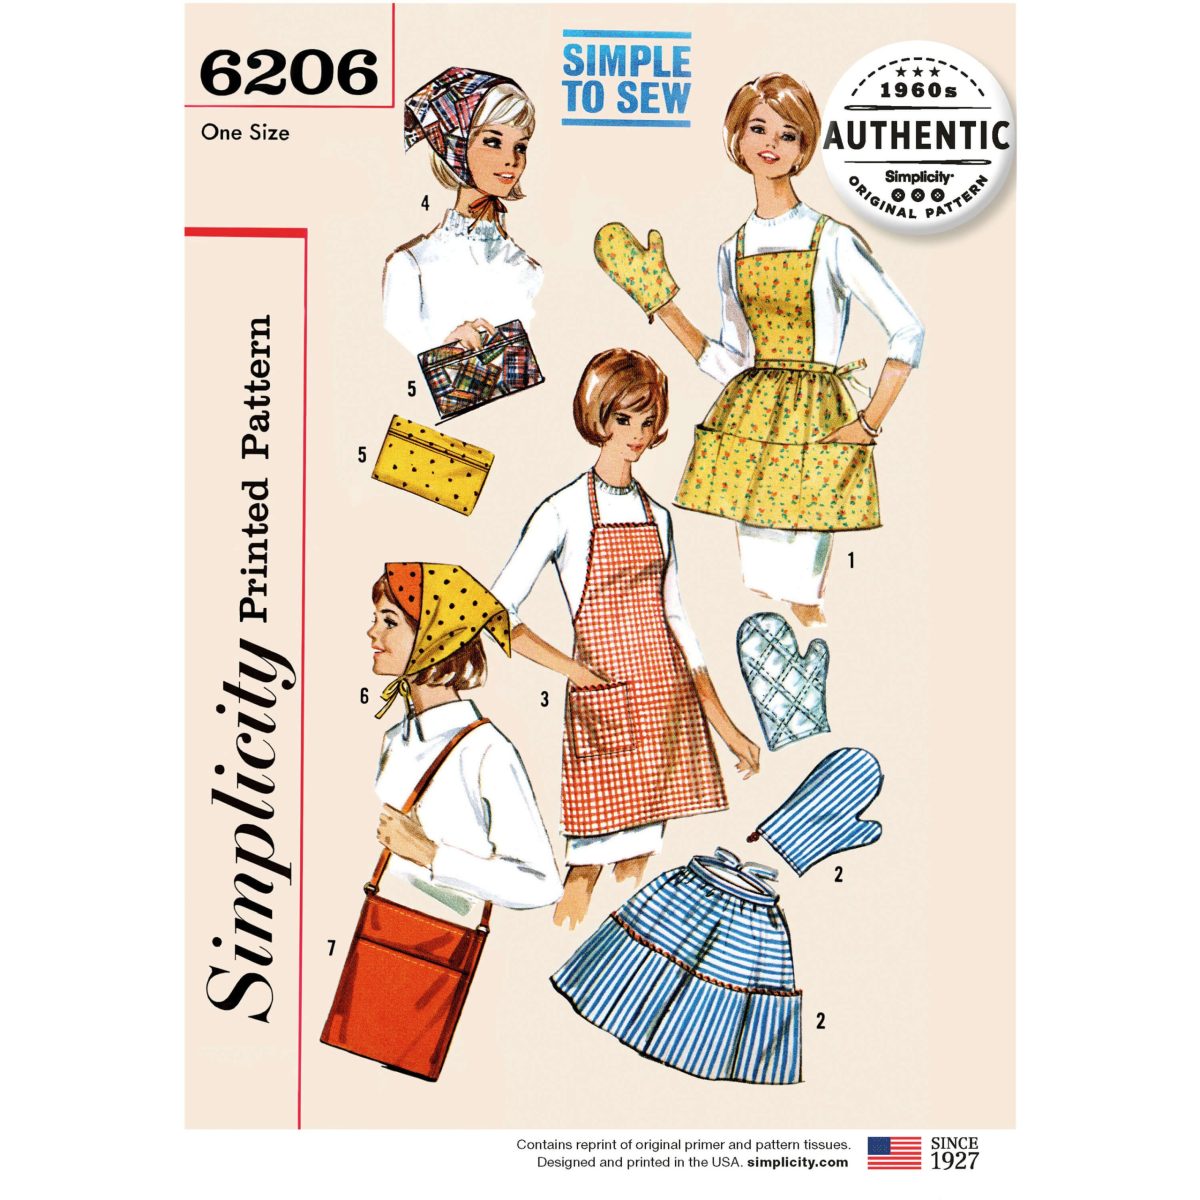 Simplicity Sewing Pattern 6206 Vintage Gift and Accessories